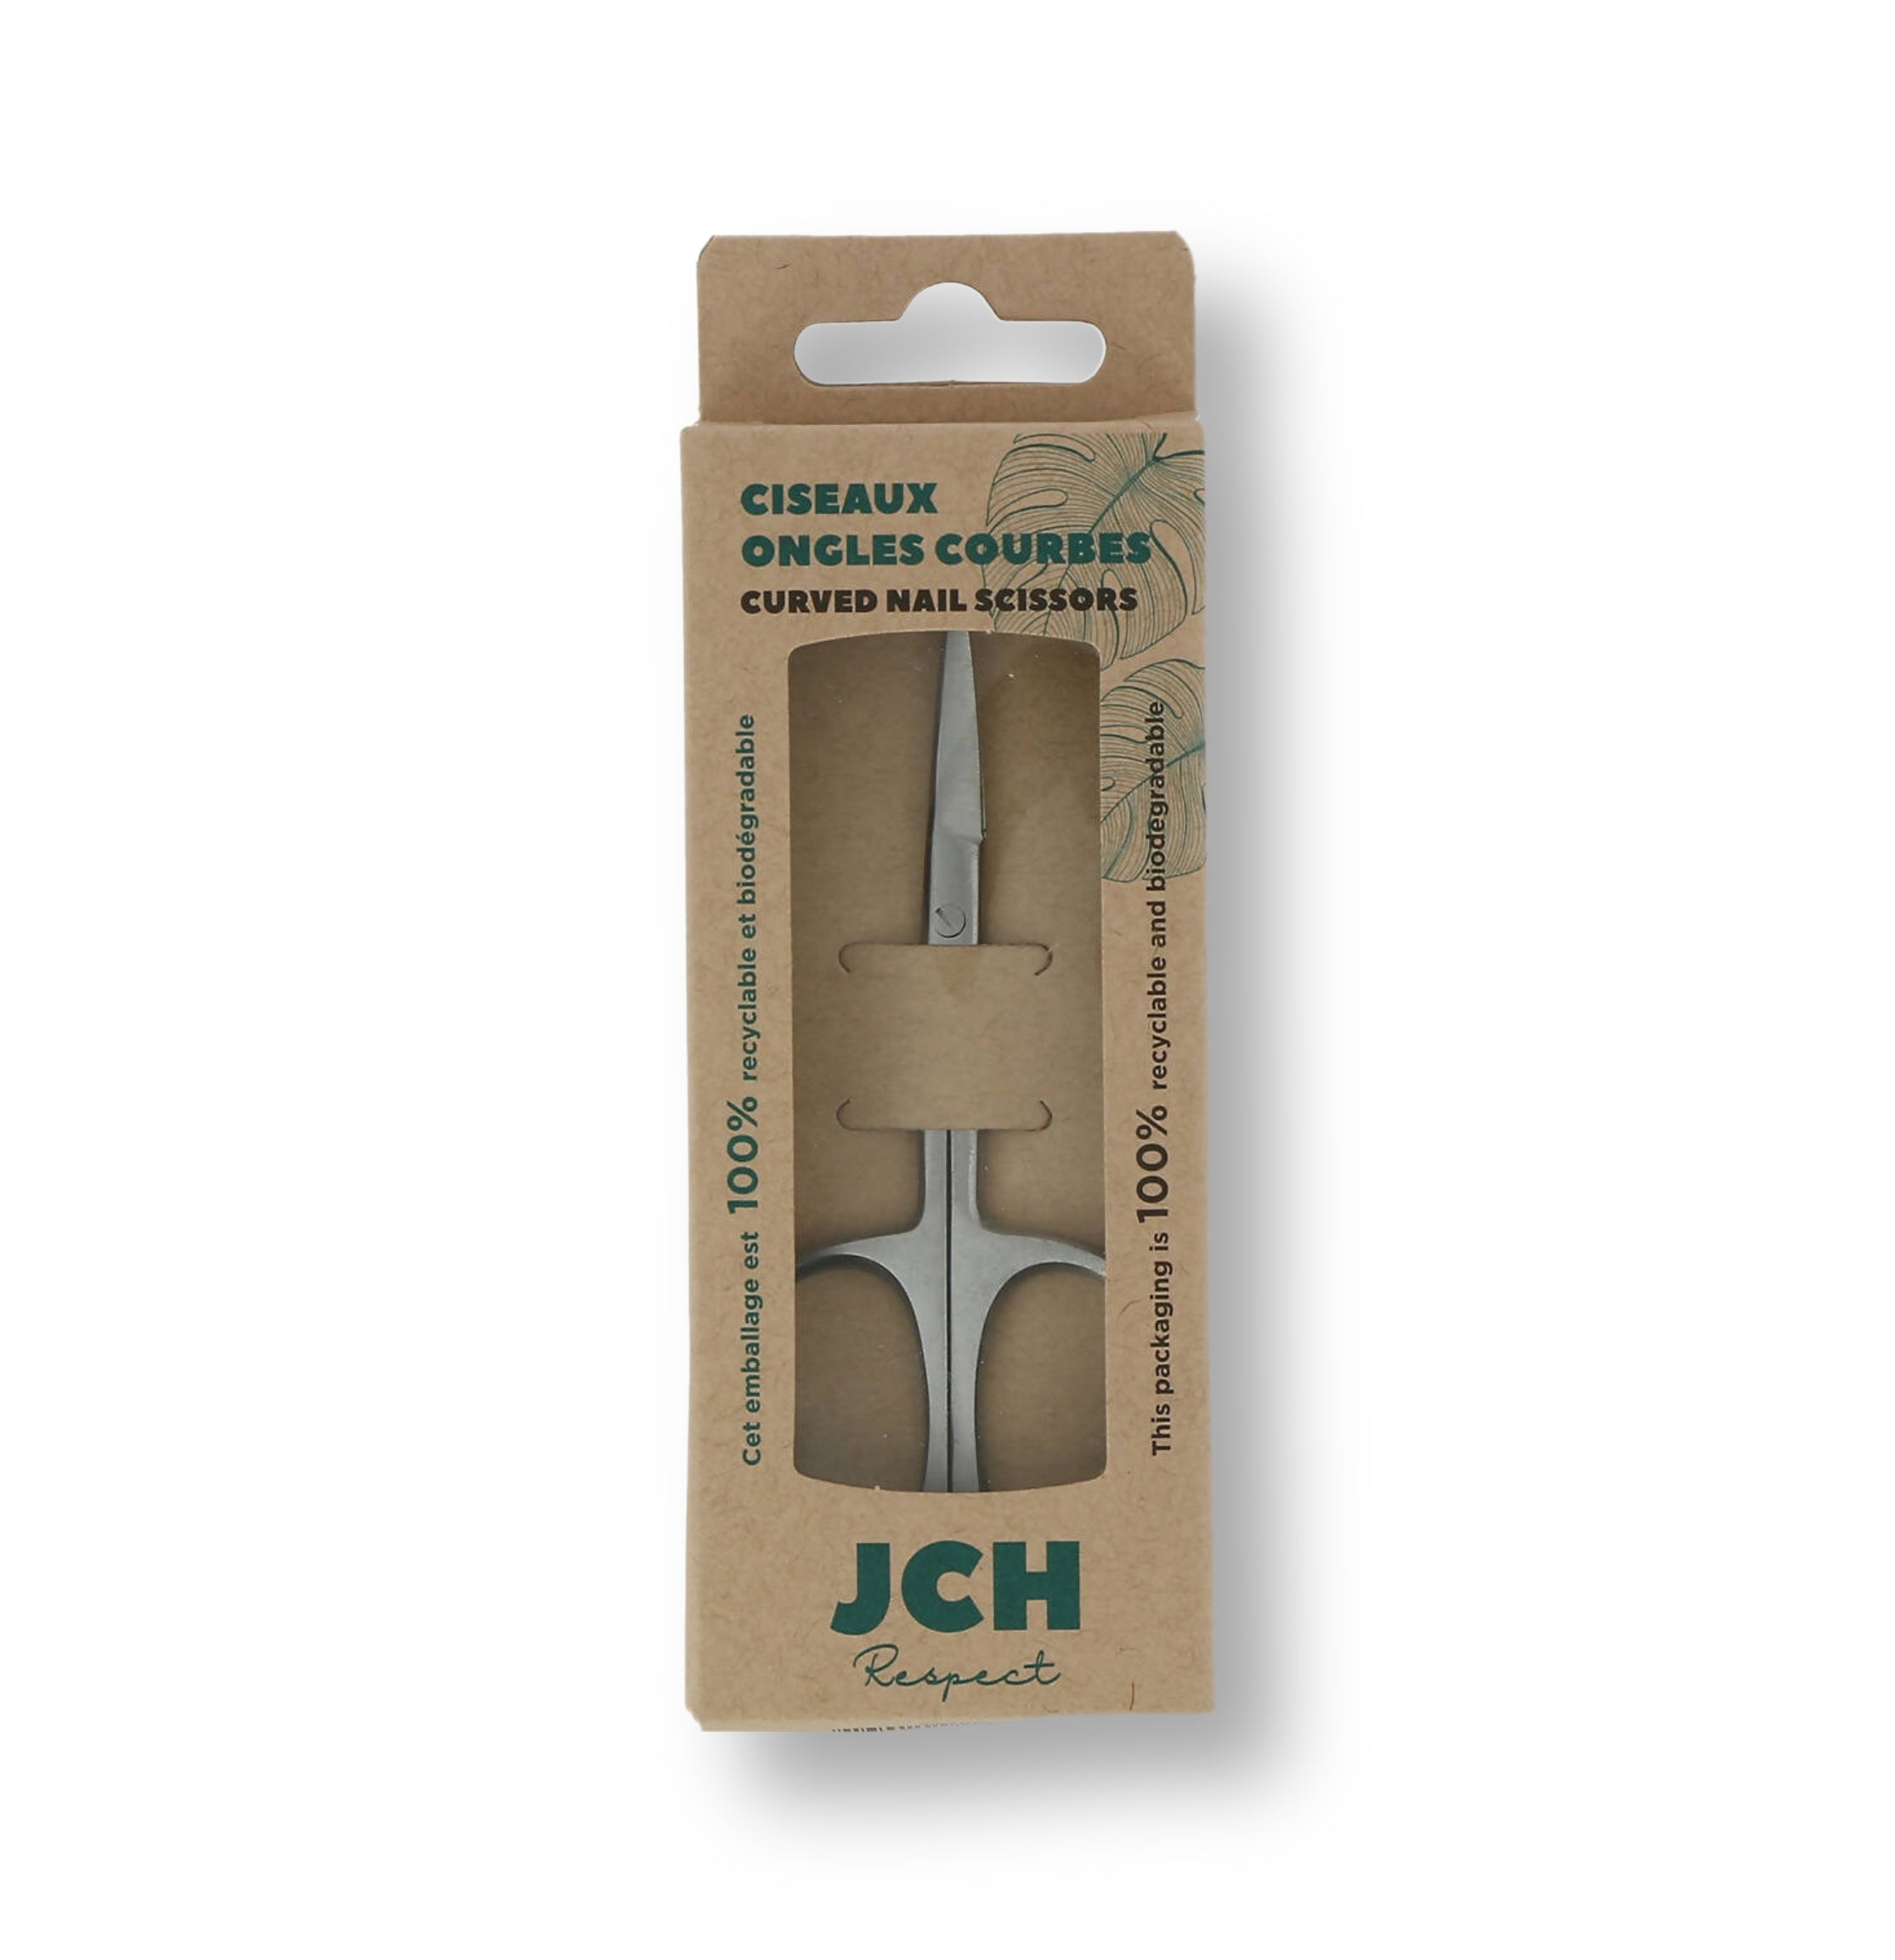 JCH Respect Curved Nail Scissors